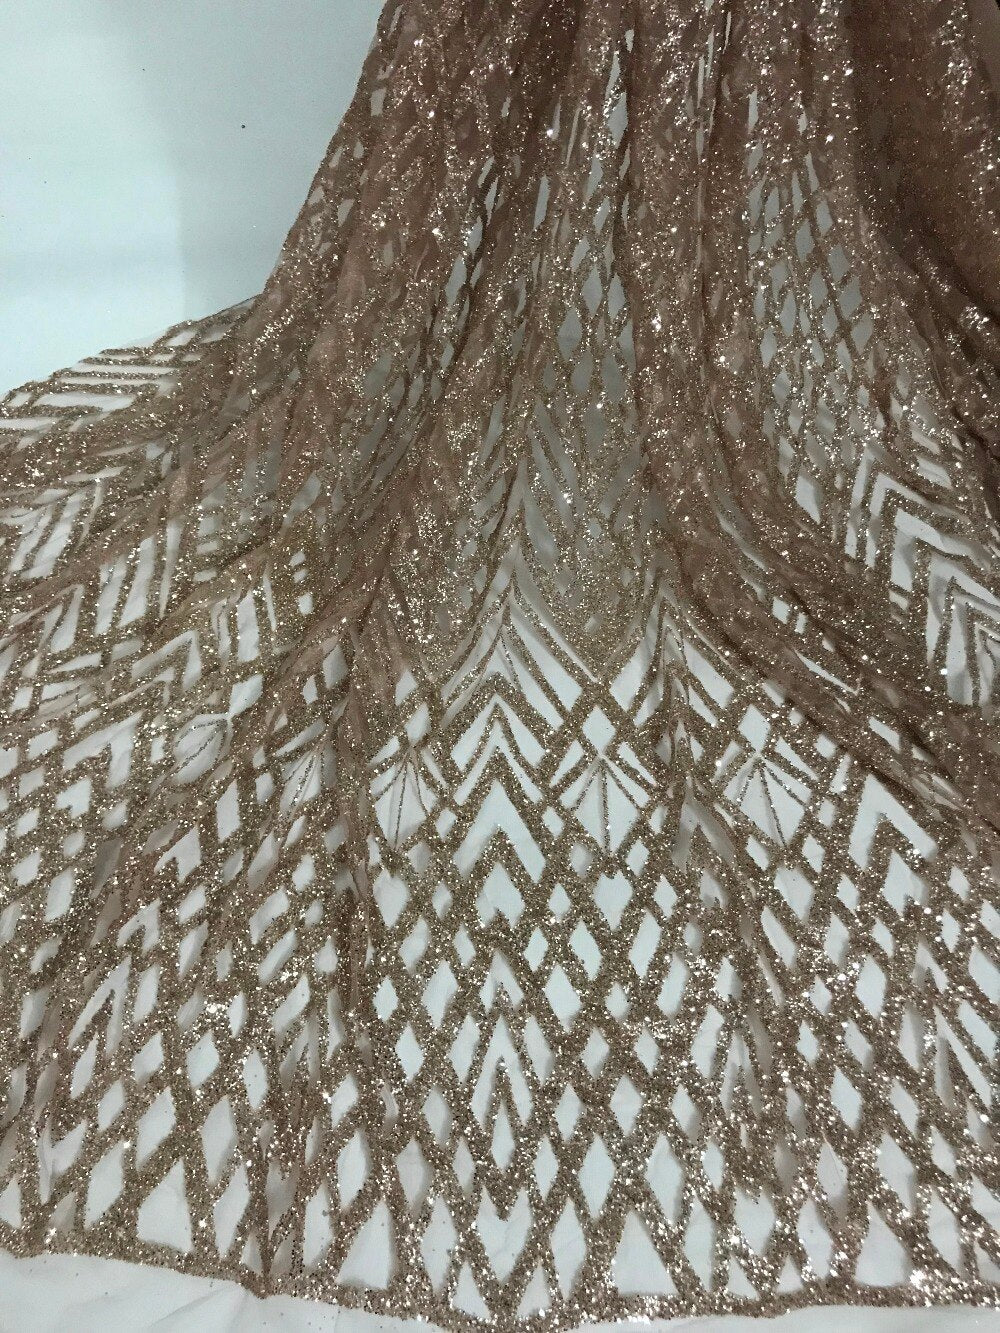 5 YARDS / Nicolette Brown Gold Geometric Embroidery Glitter Mesh Lace Wedding Party Dress Fabric